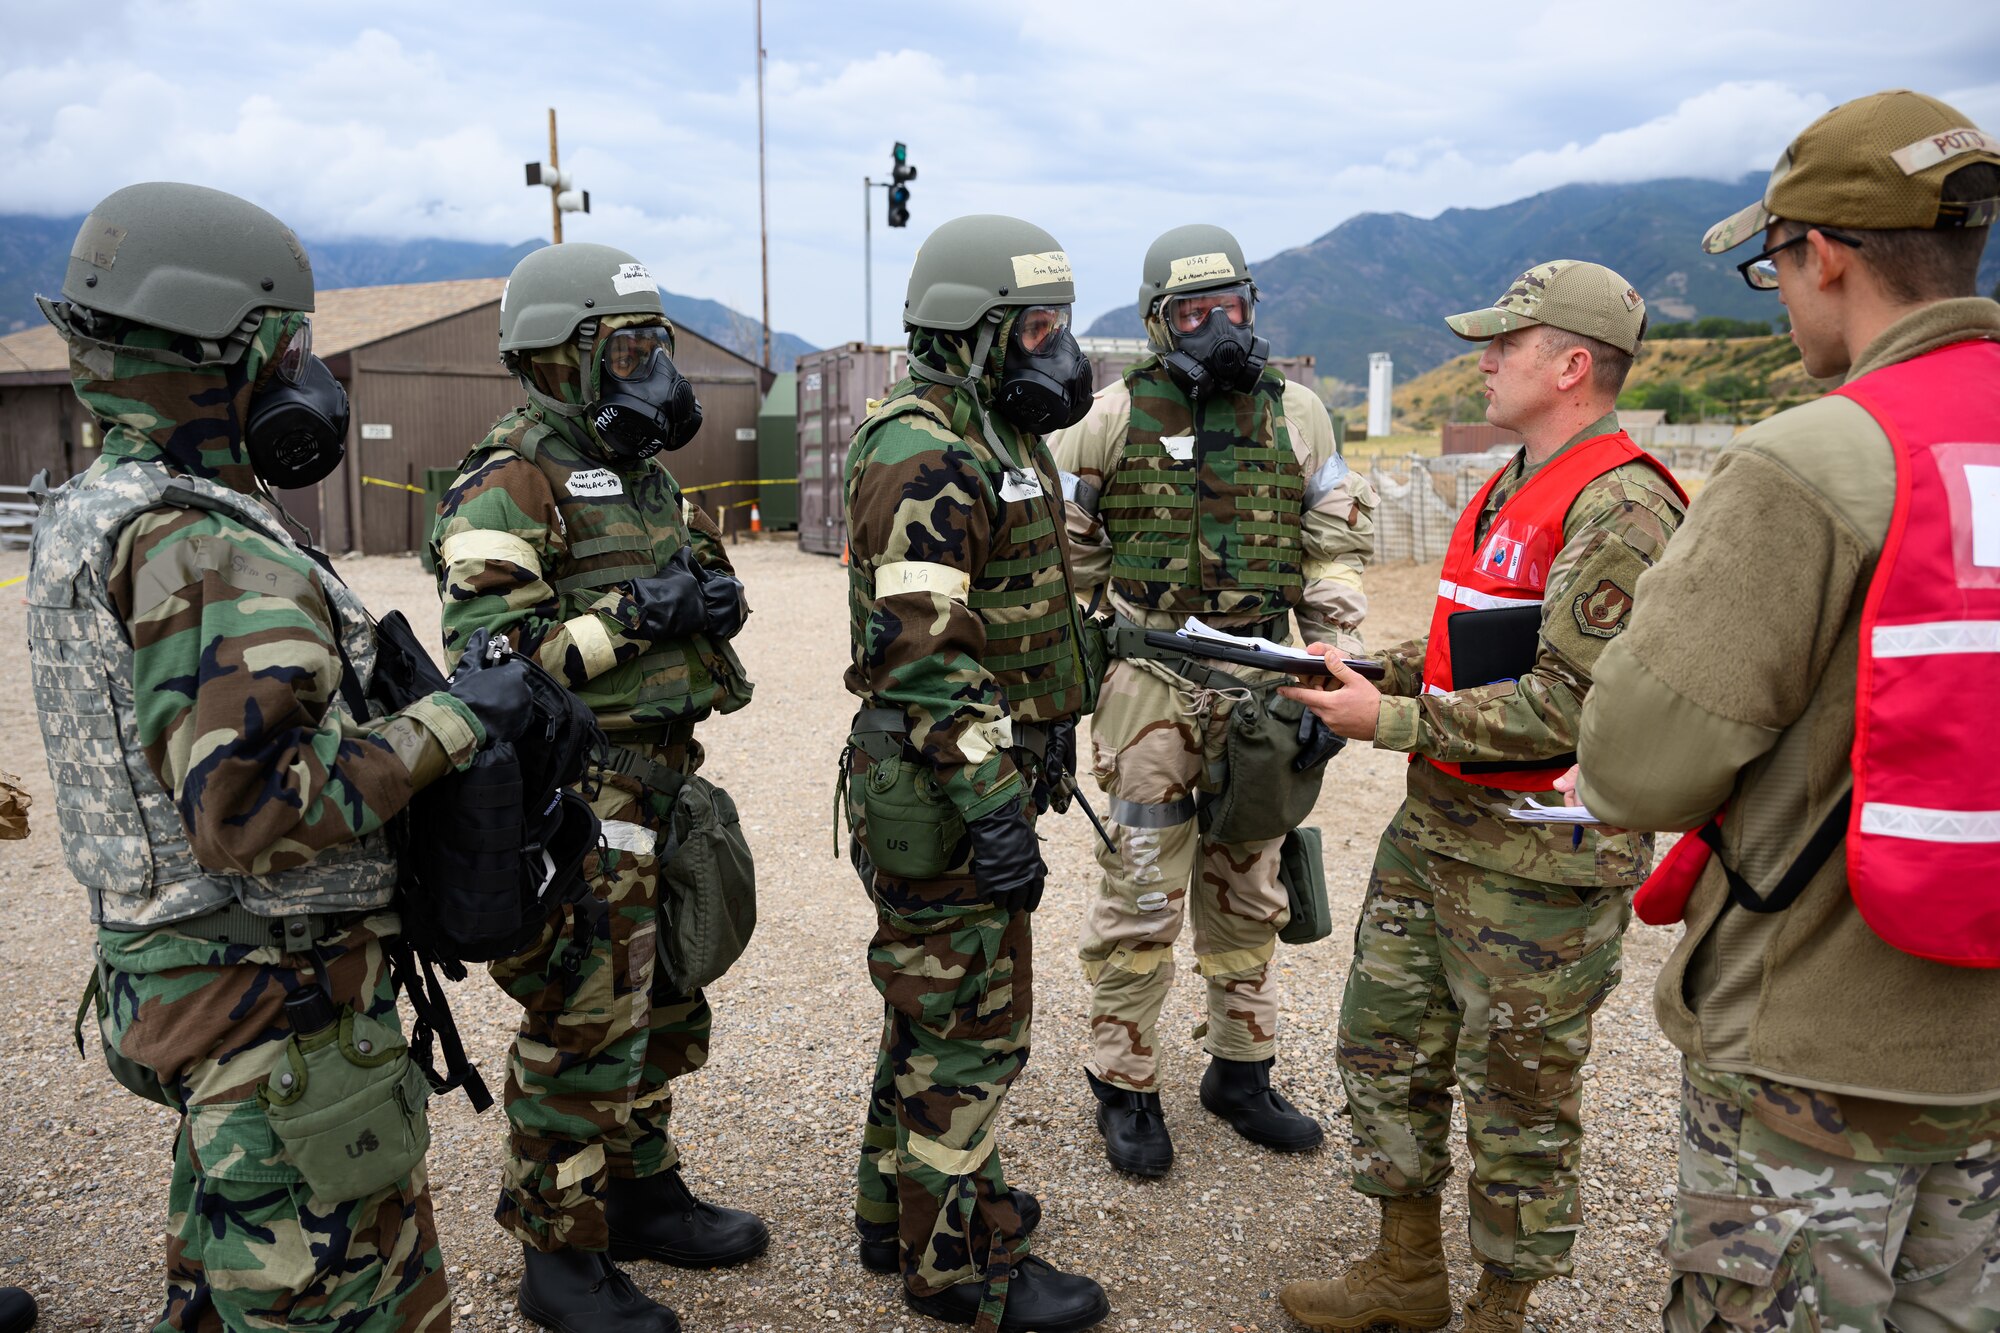 Master Sgt. Kenneth Richmond, Wing Inspection Team member, speaks with a post-attack reconnaissance team during a Phase 2 exercise at Hill Air Force Base, Utah, Sept. 14, 2022.